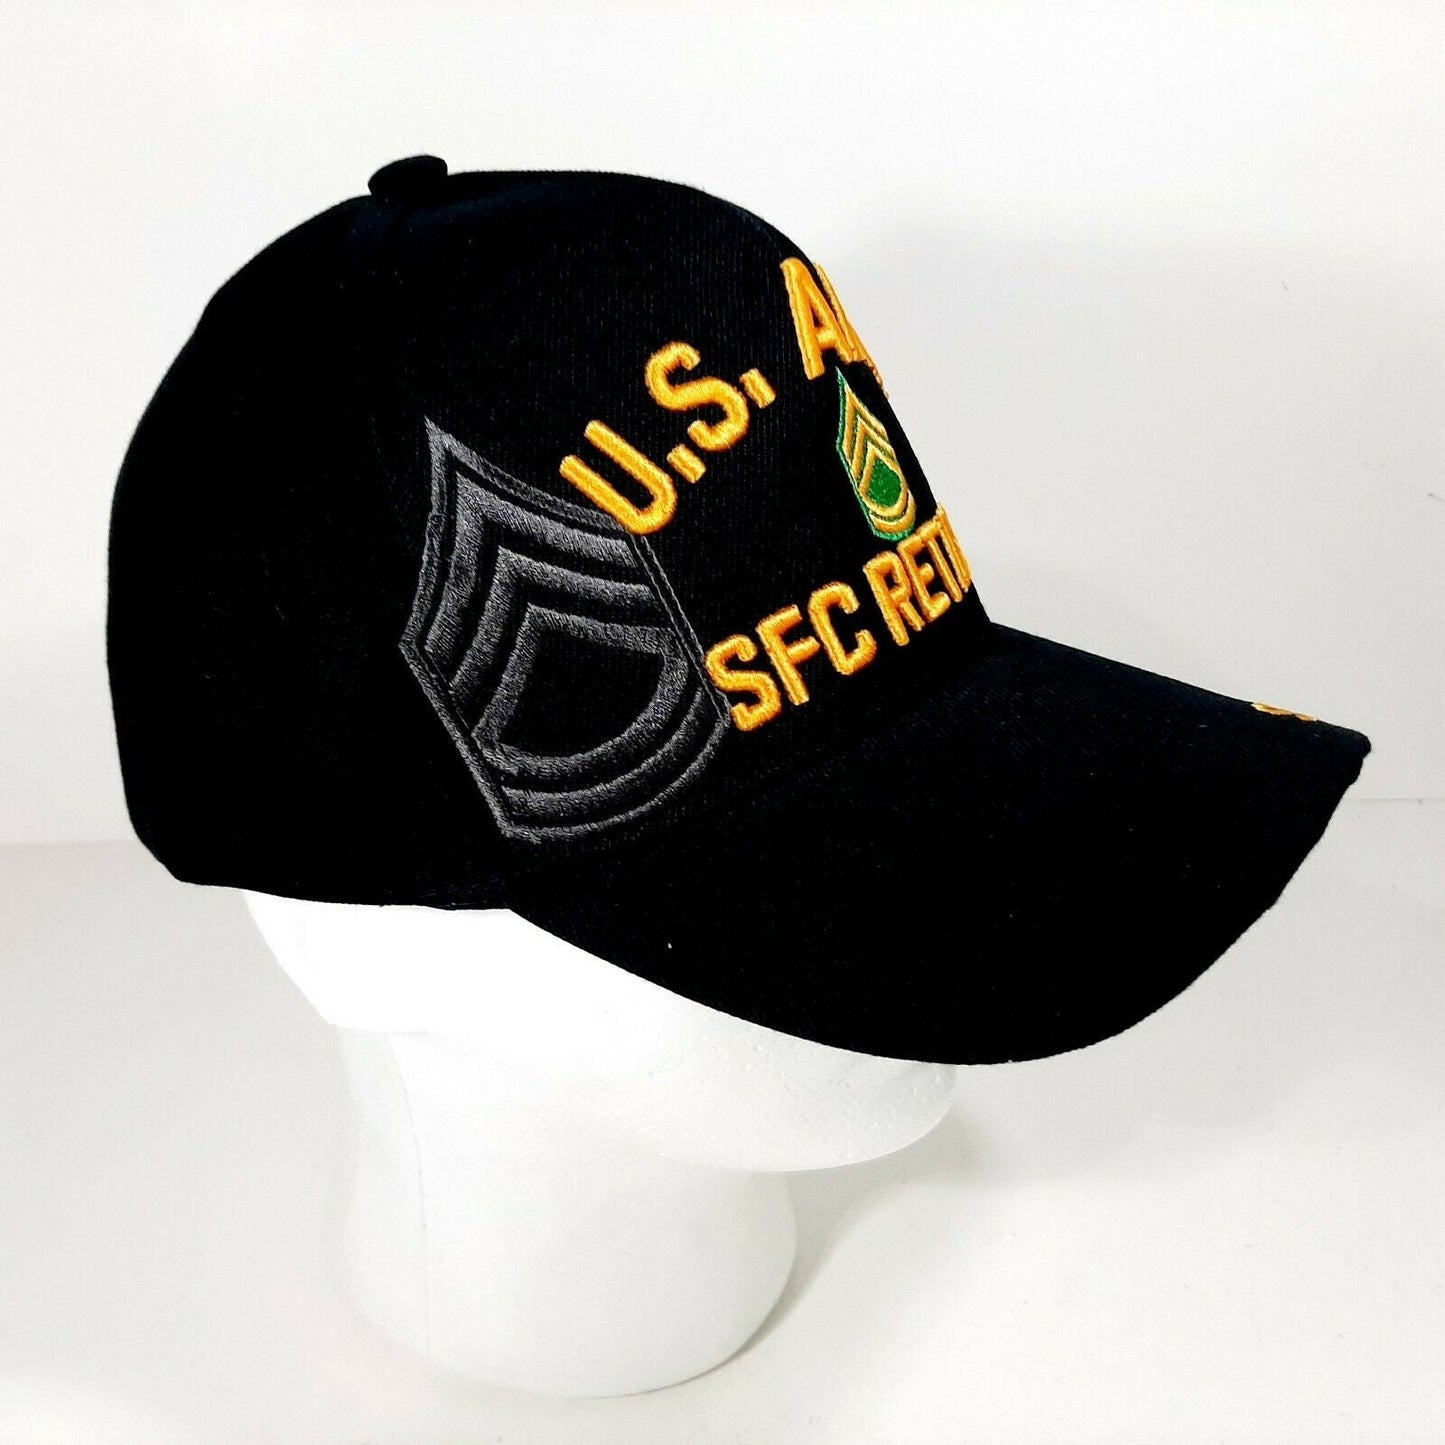 US Army SFC Retired Men's Baseball Cap Hat Black Embroidered Acrylic